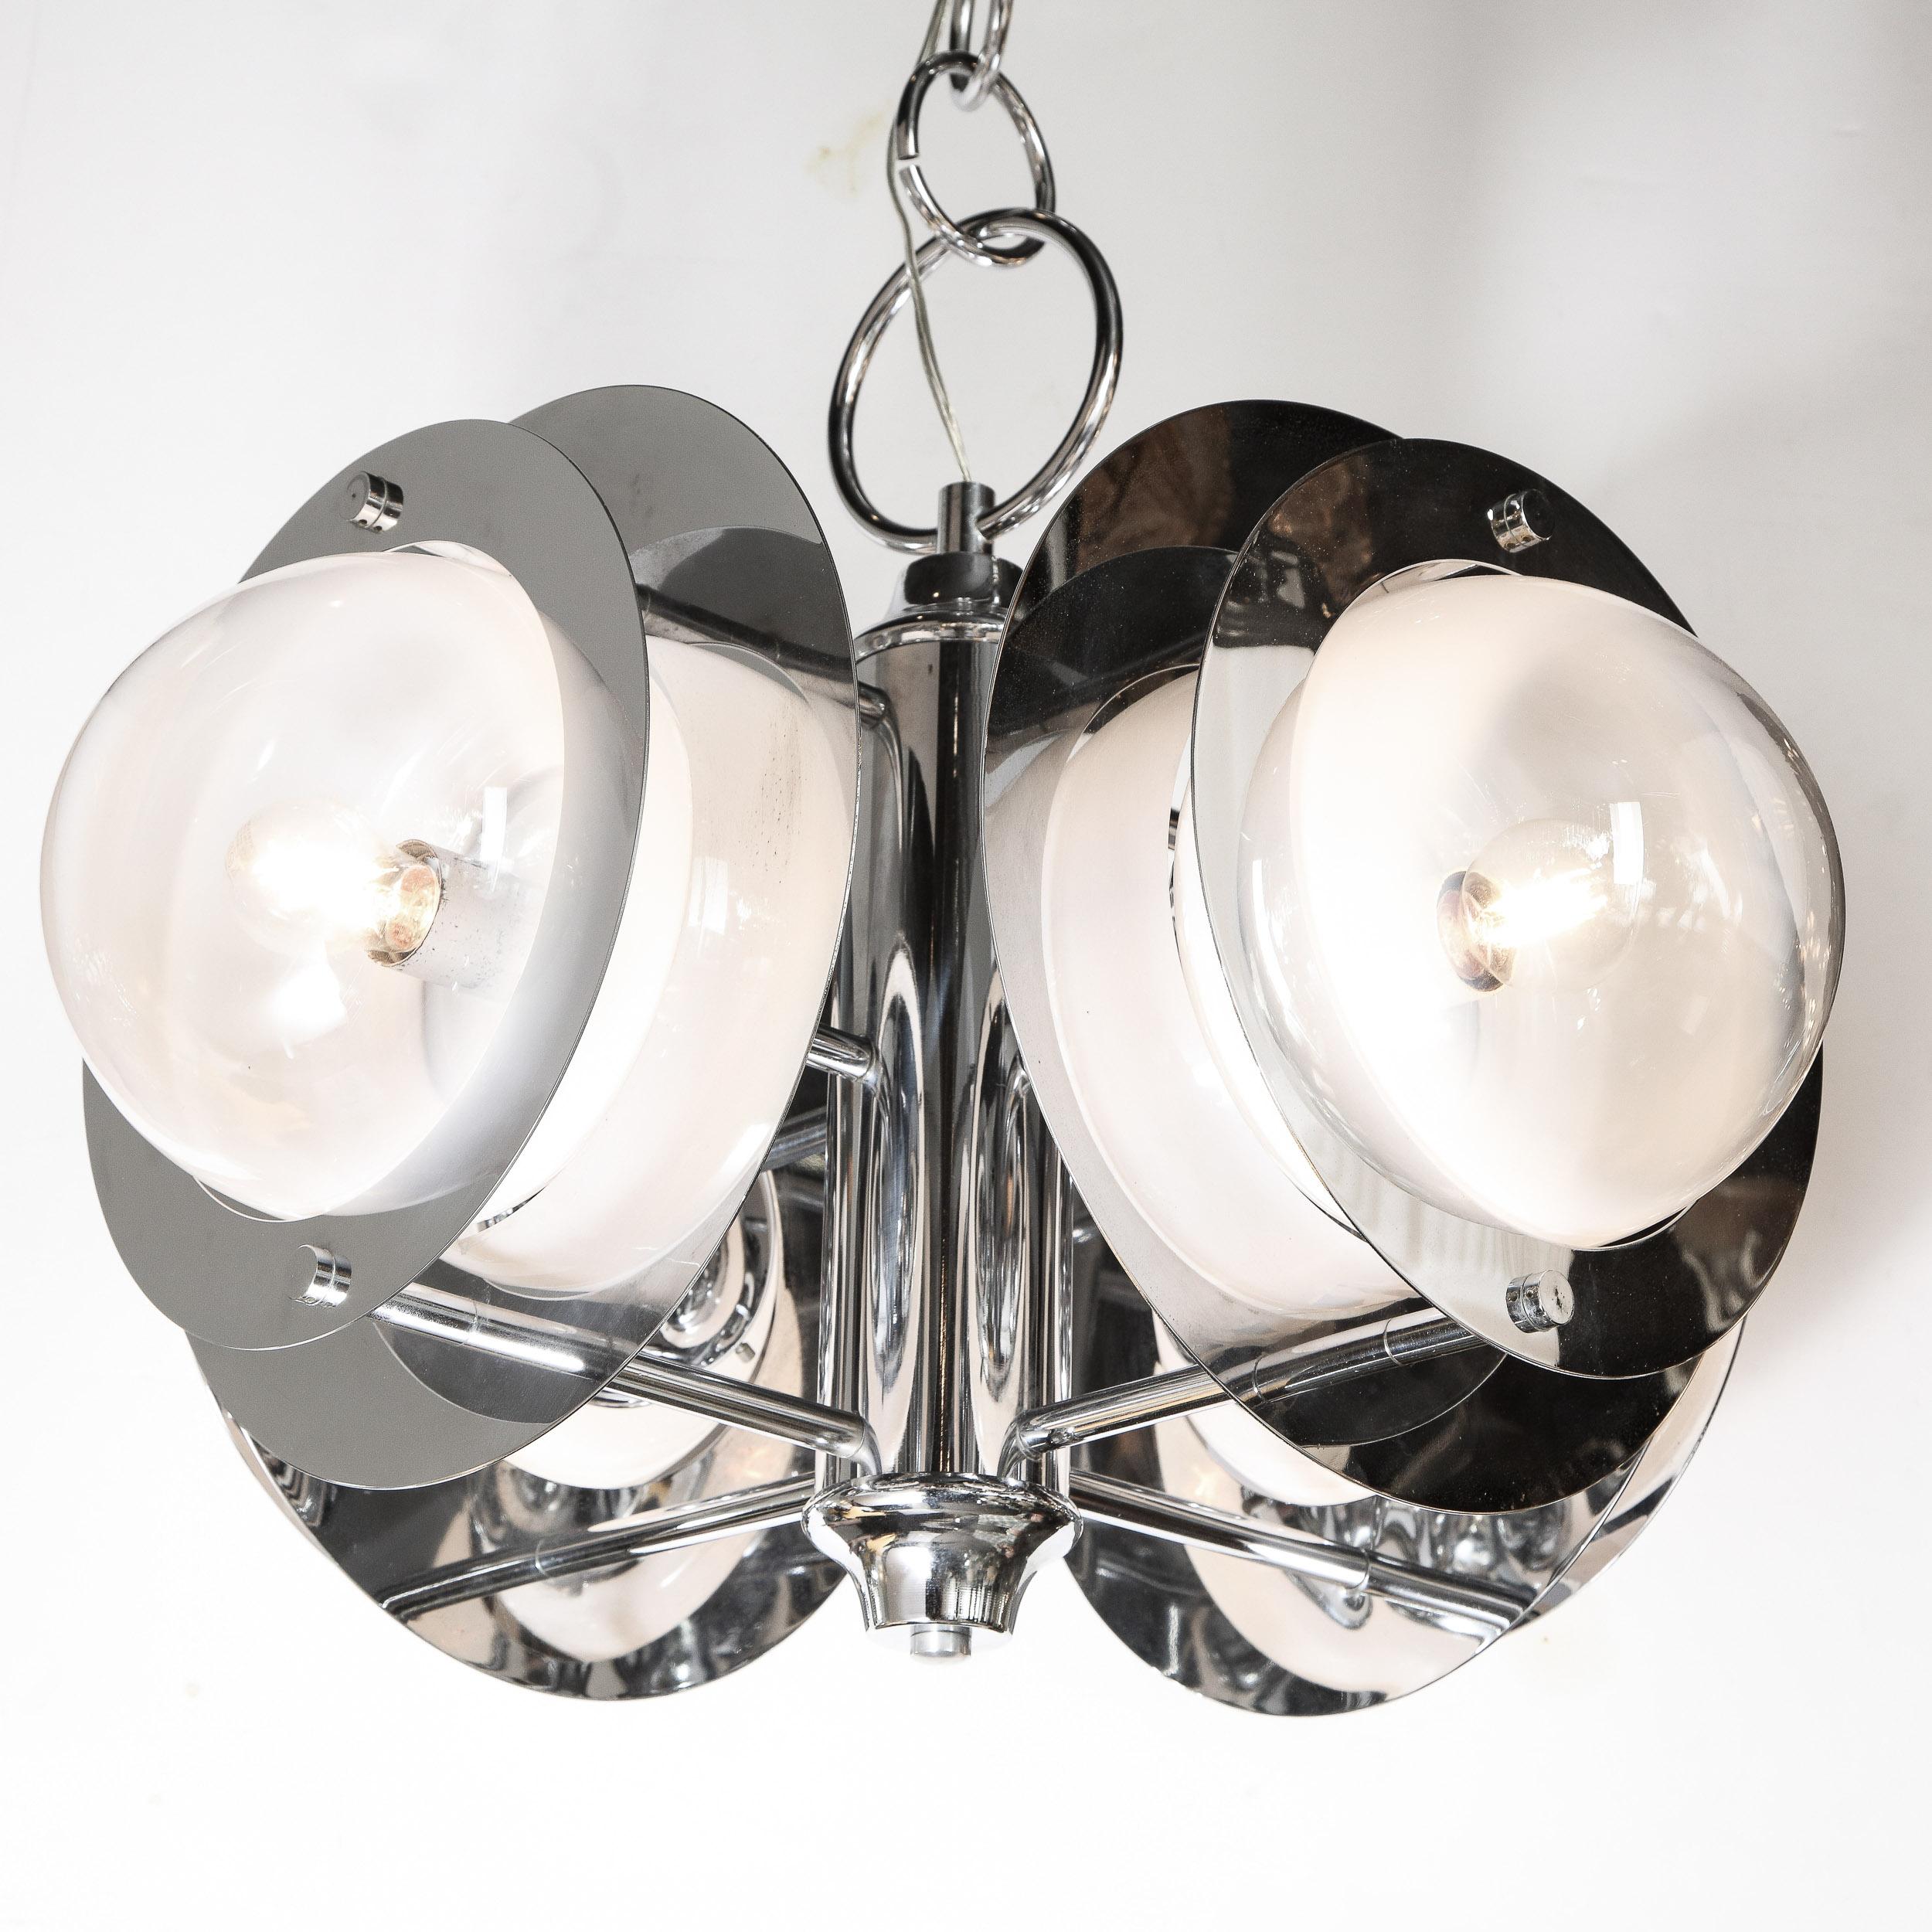 Late 20th Century Mid-Century Modern Polished Chrome & Murano Ombre Glass Occulus 4-Arm Chandelier For Sale